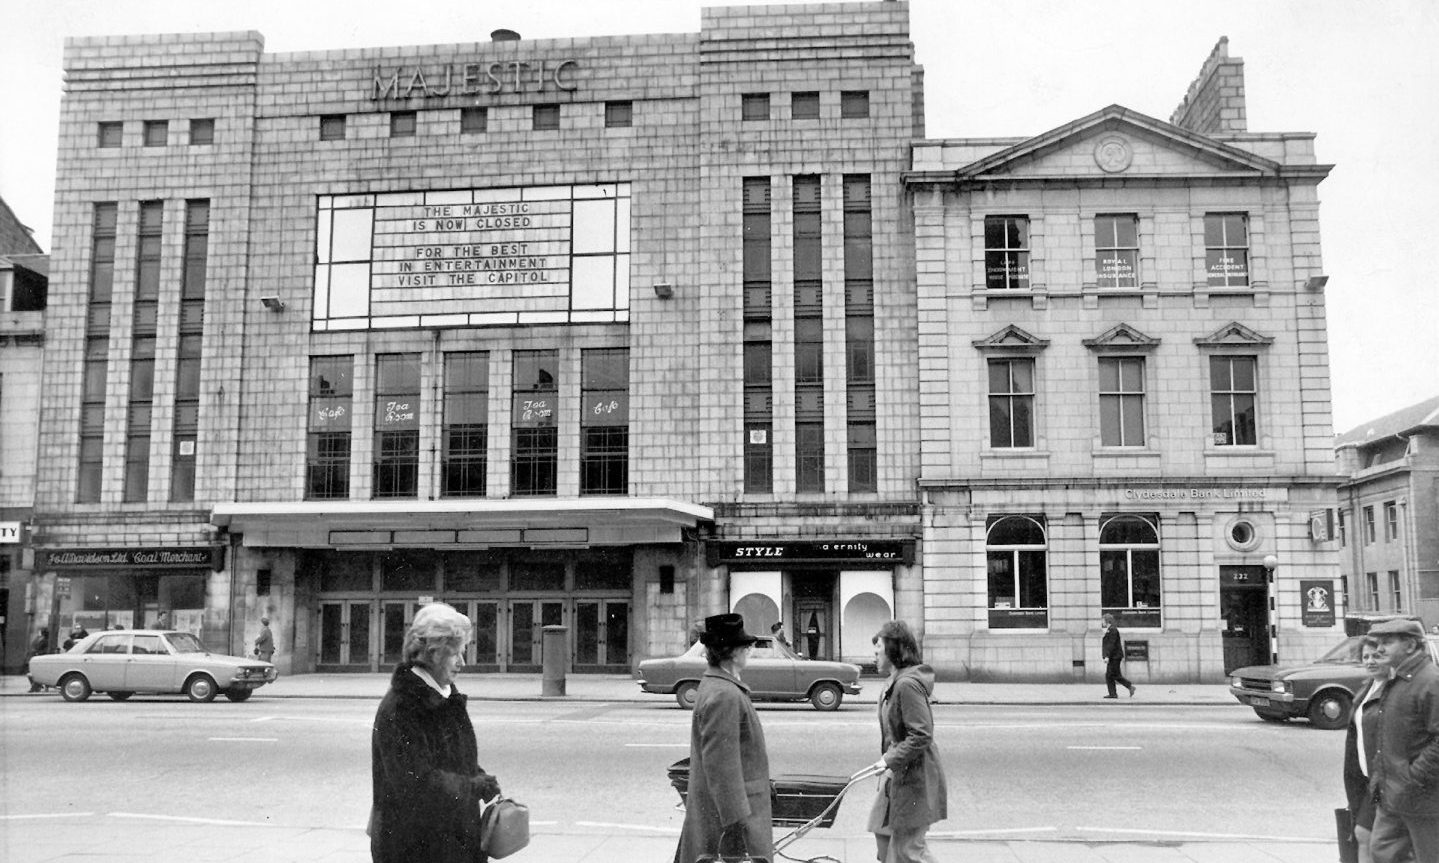 The Majestic Cinema on Union Street in 1974